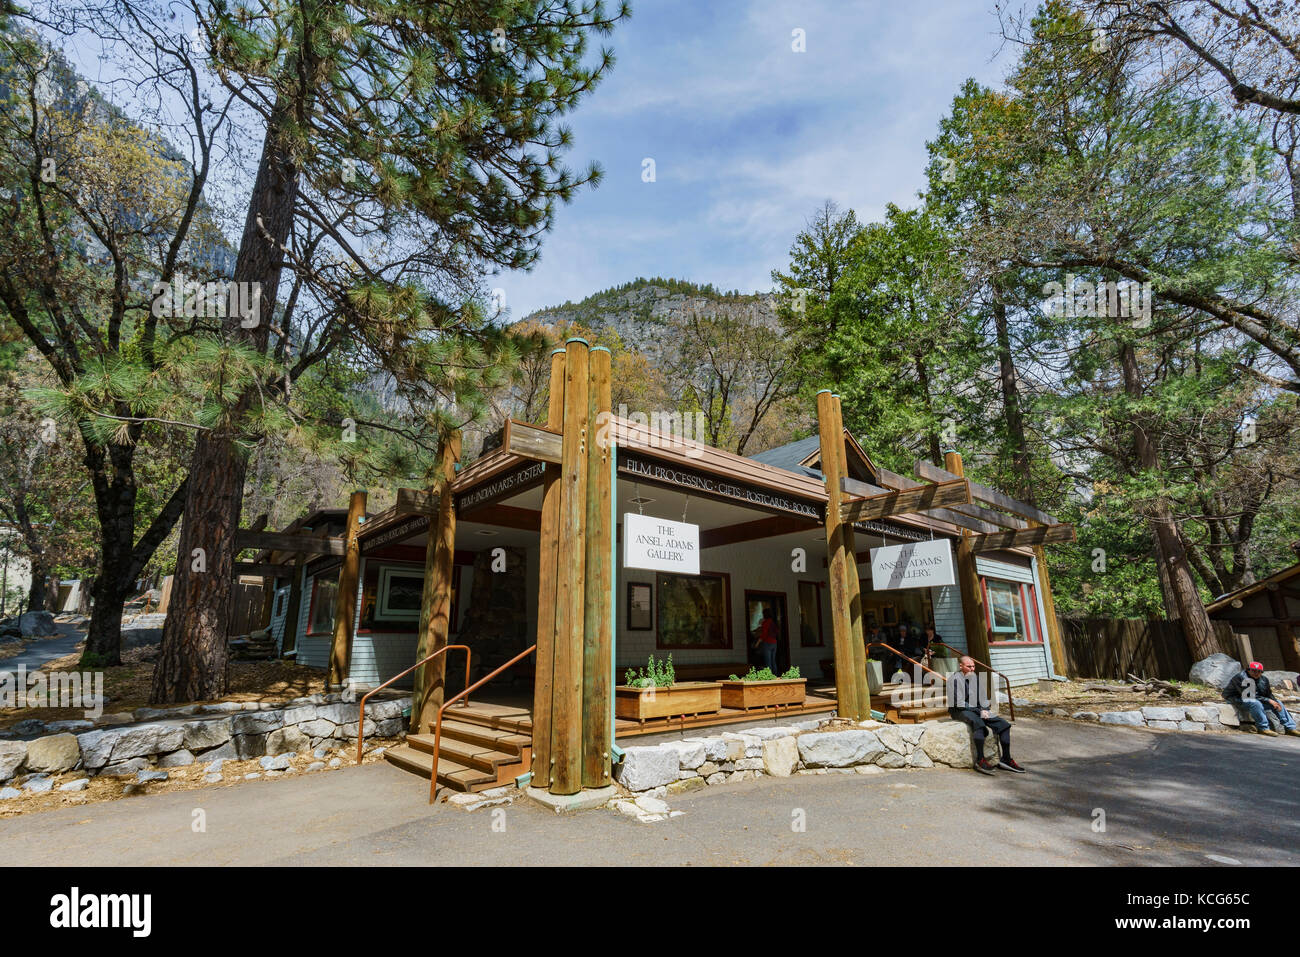 Yosemite, APR 15: Exterior view of the Ansel Adams Gallery on APR 15, 2017 at the famous Yosemite National Park, Califronia, United States Stock Photo